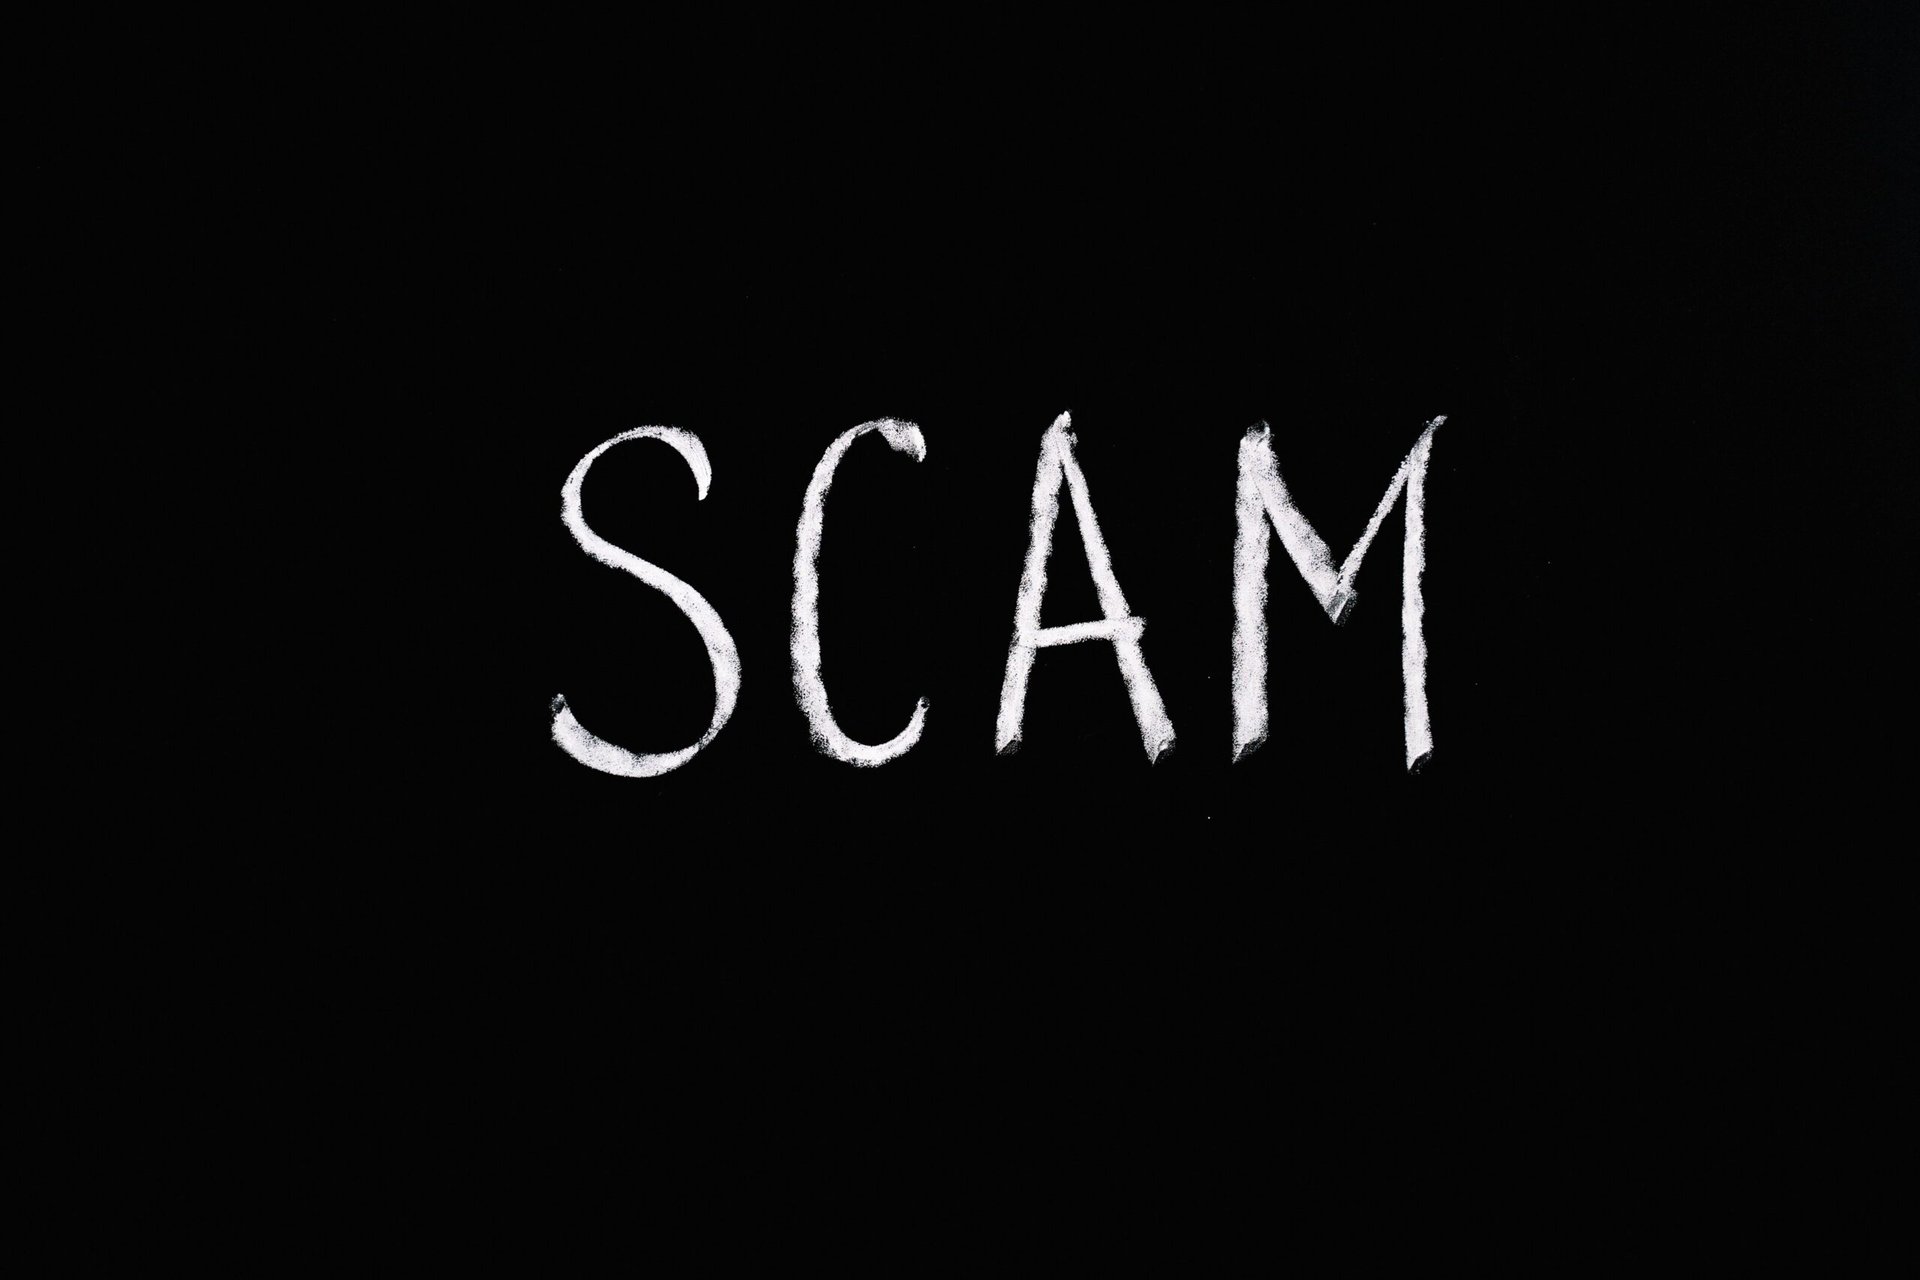 Knwex: reviews. Scam or not. Online fraud lawyer